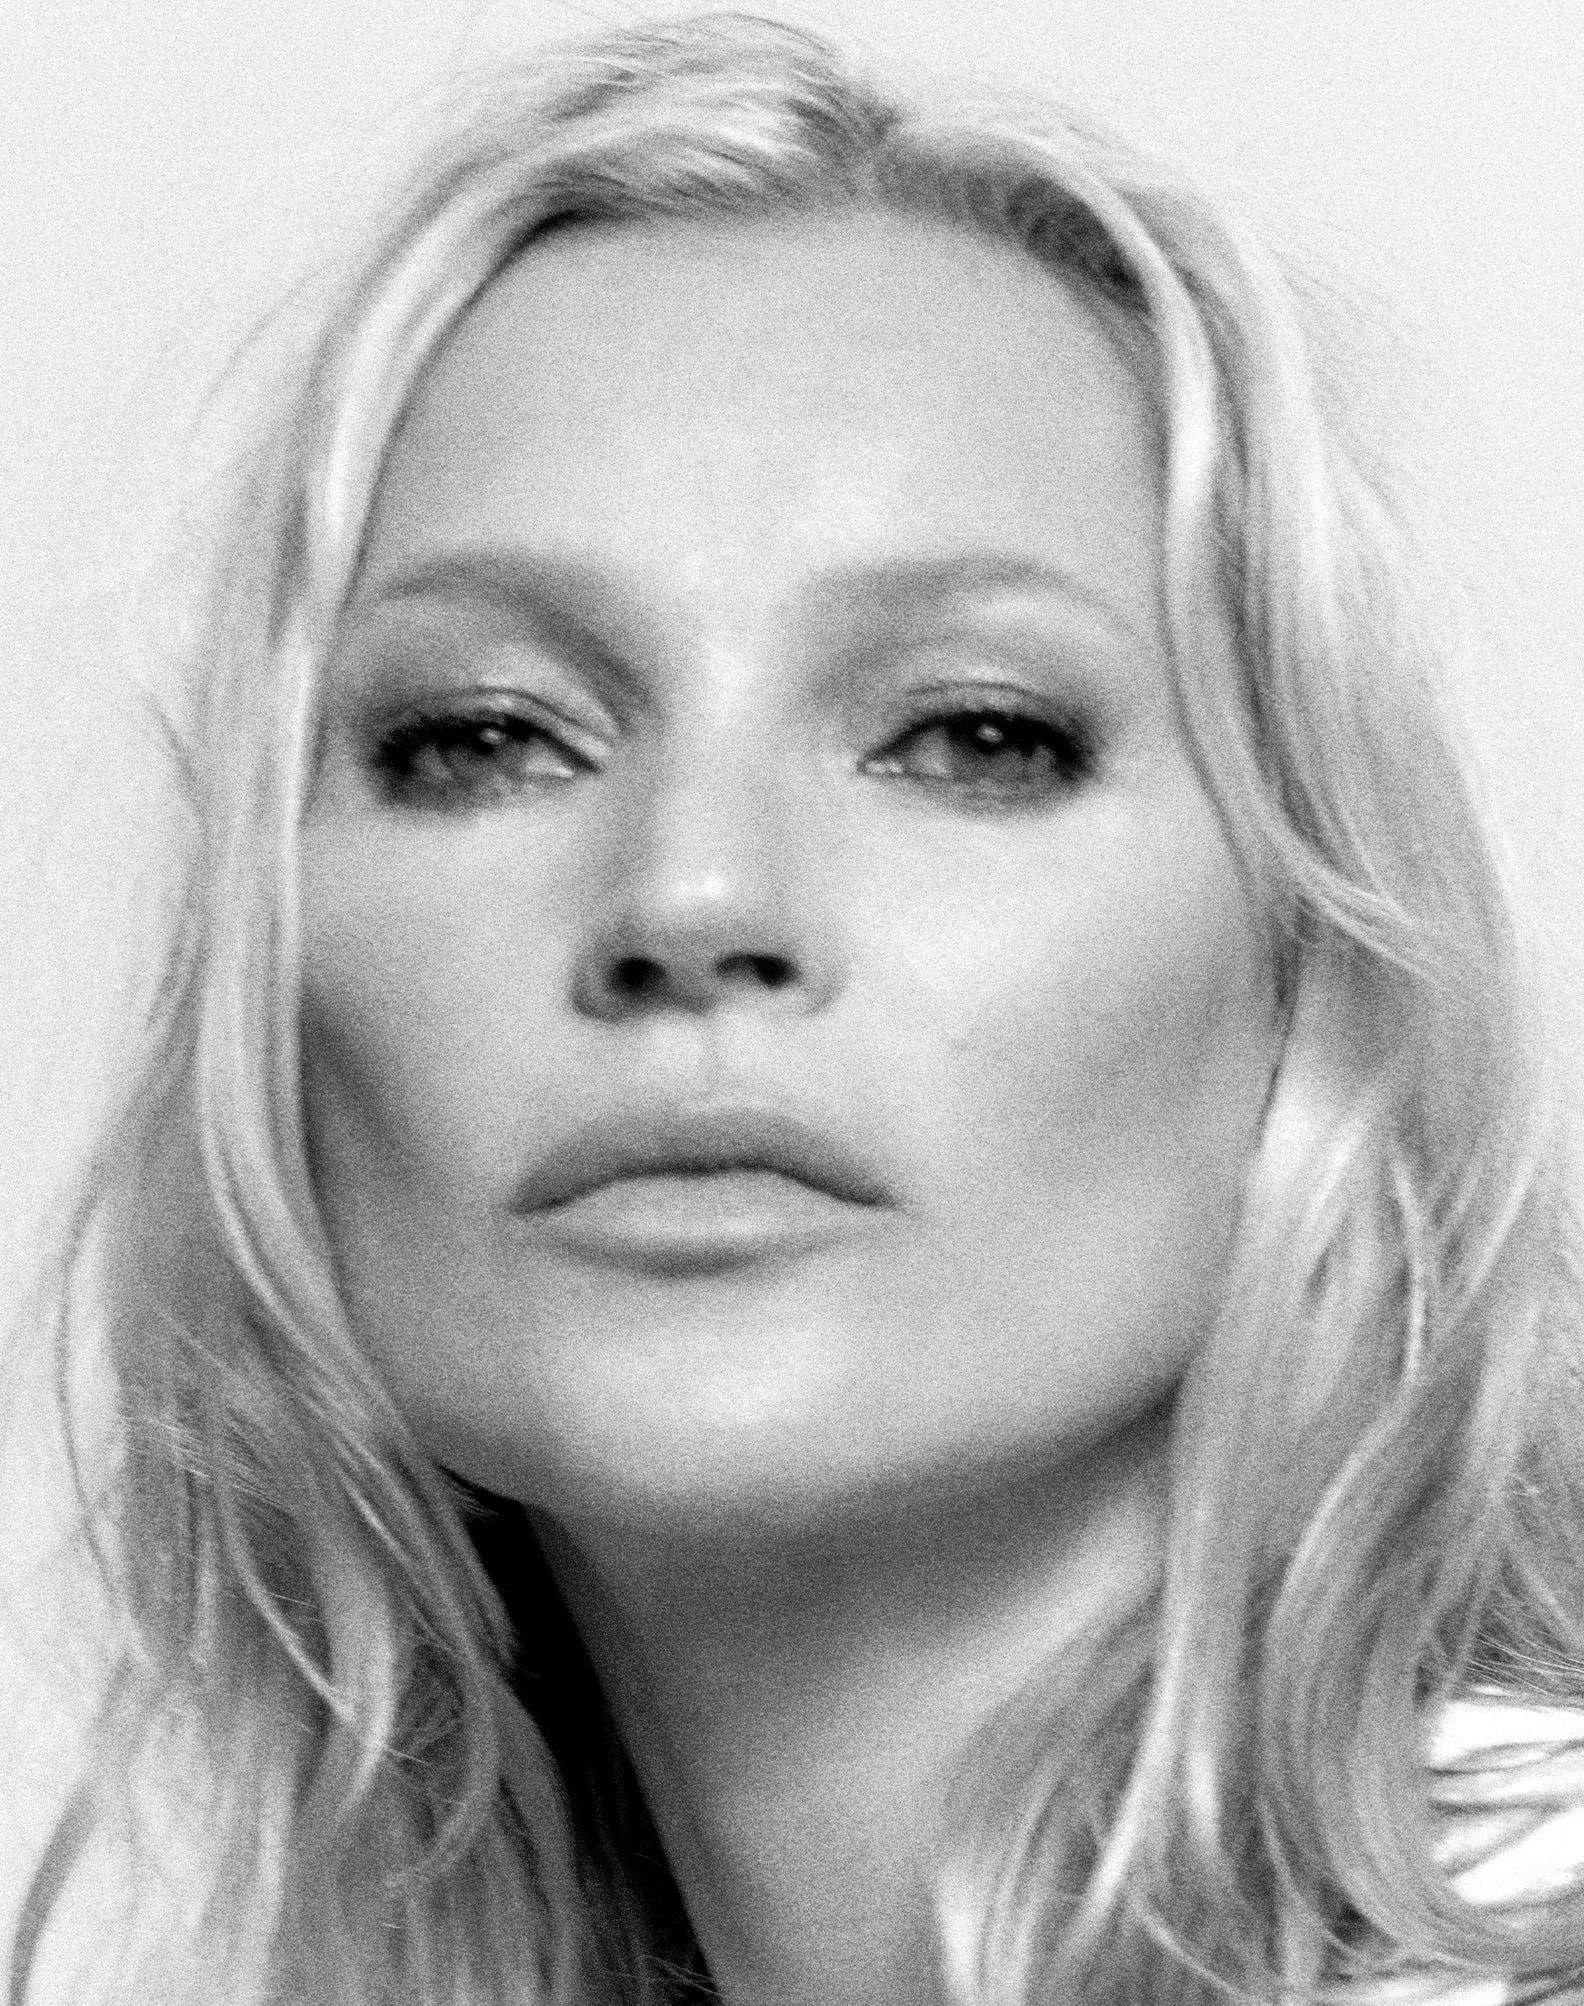 Kate Moss by Chris Colls